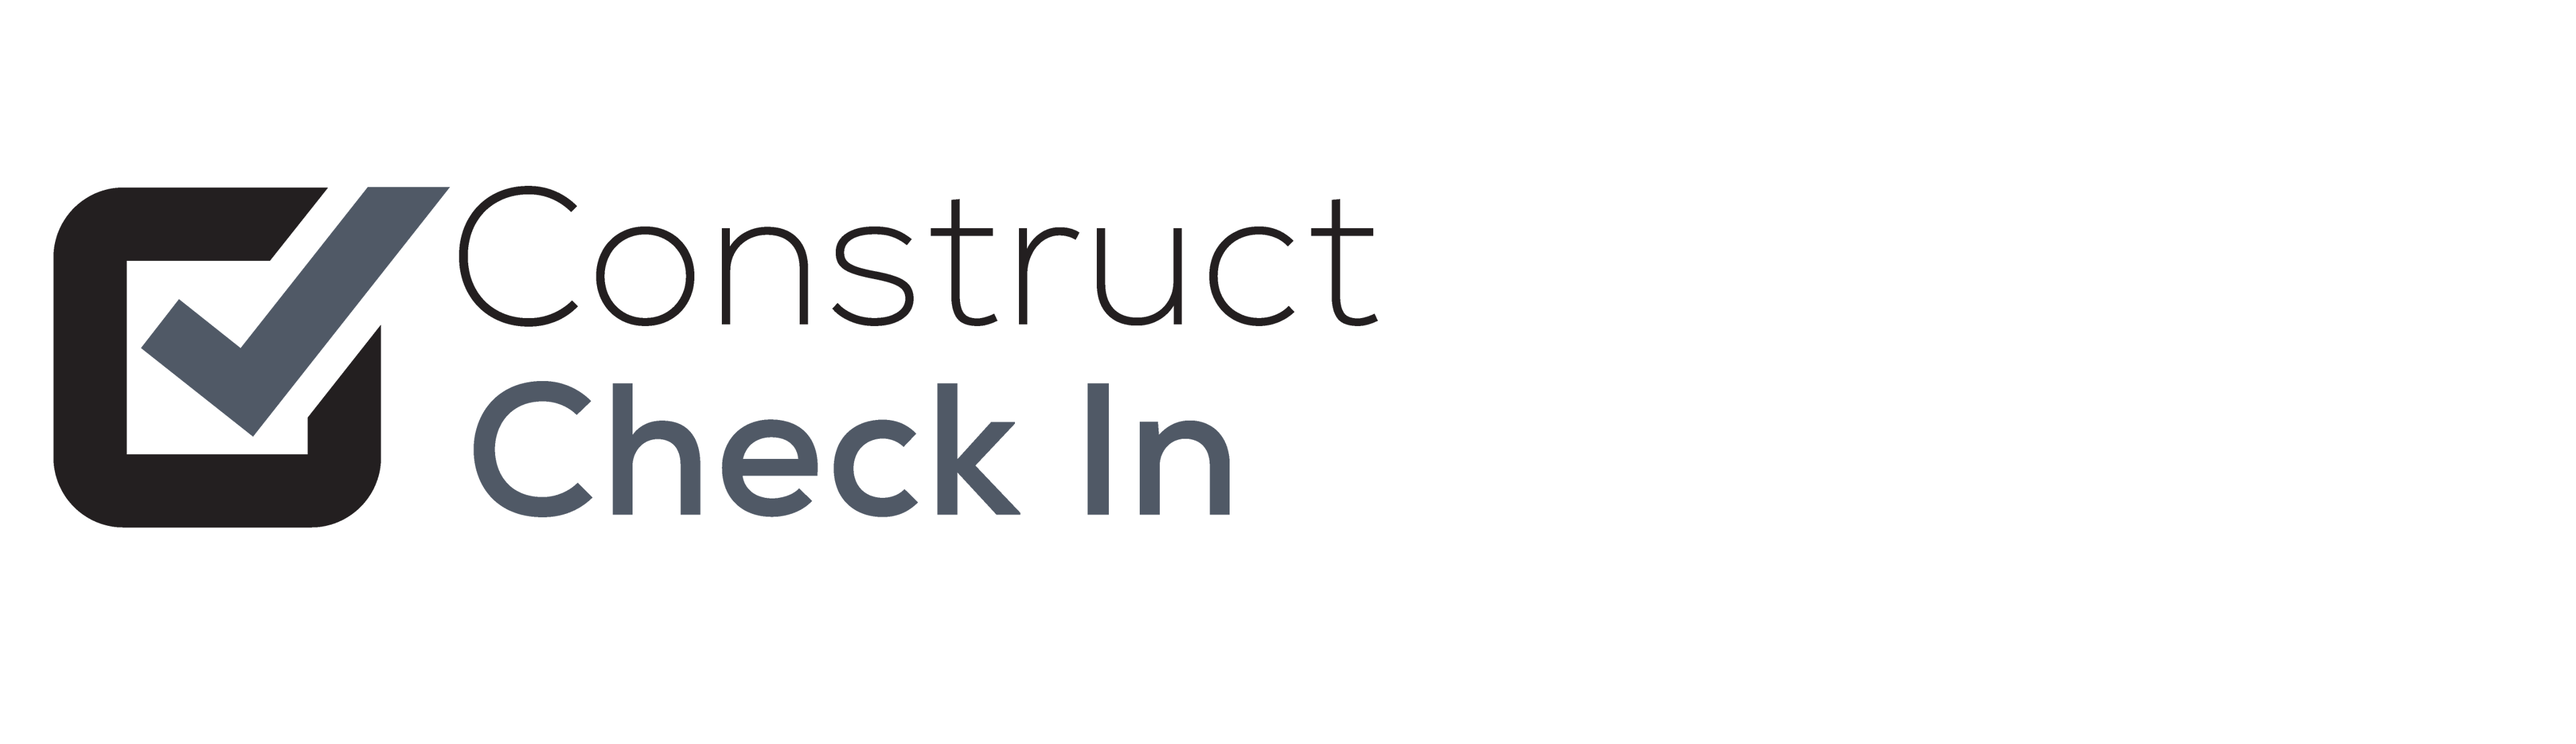 CONSTRUCT Check-In